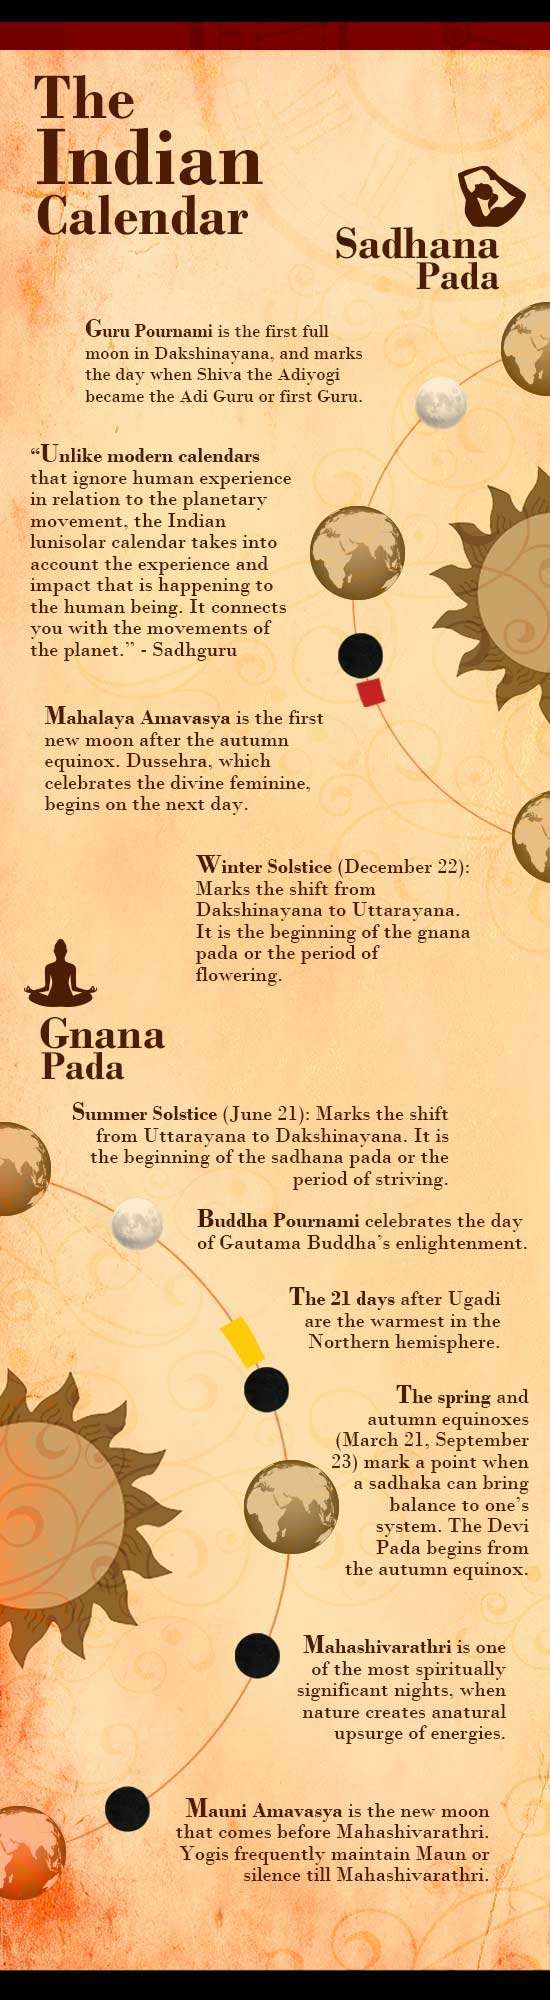 Infographic - The Indian Calendar